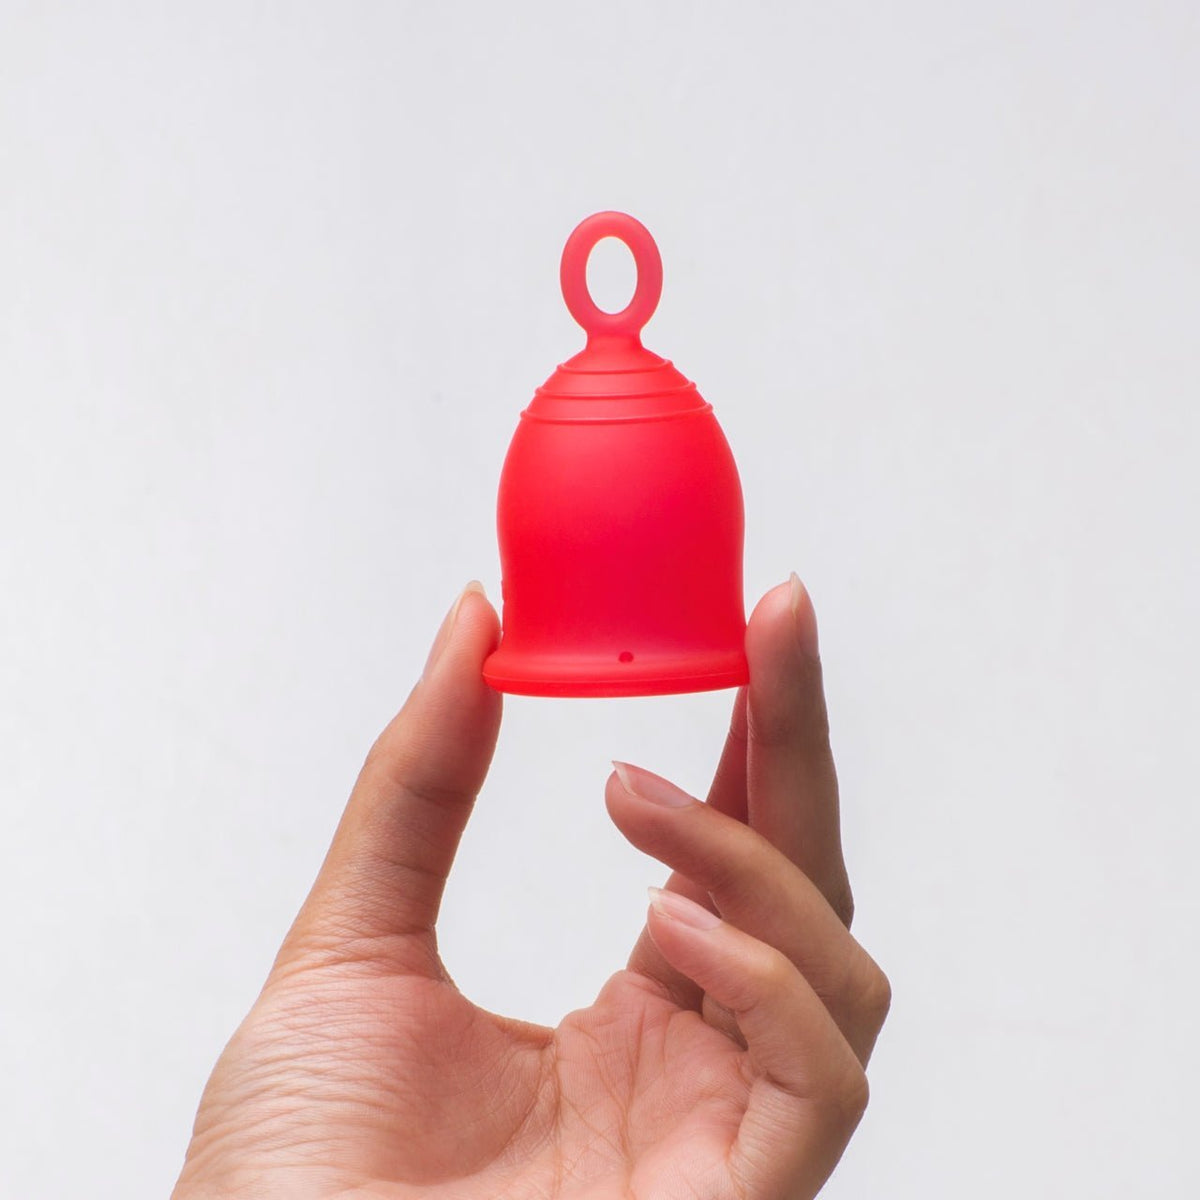 Help! I can't get my menstrual cup out! 